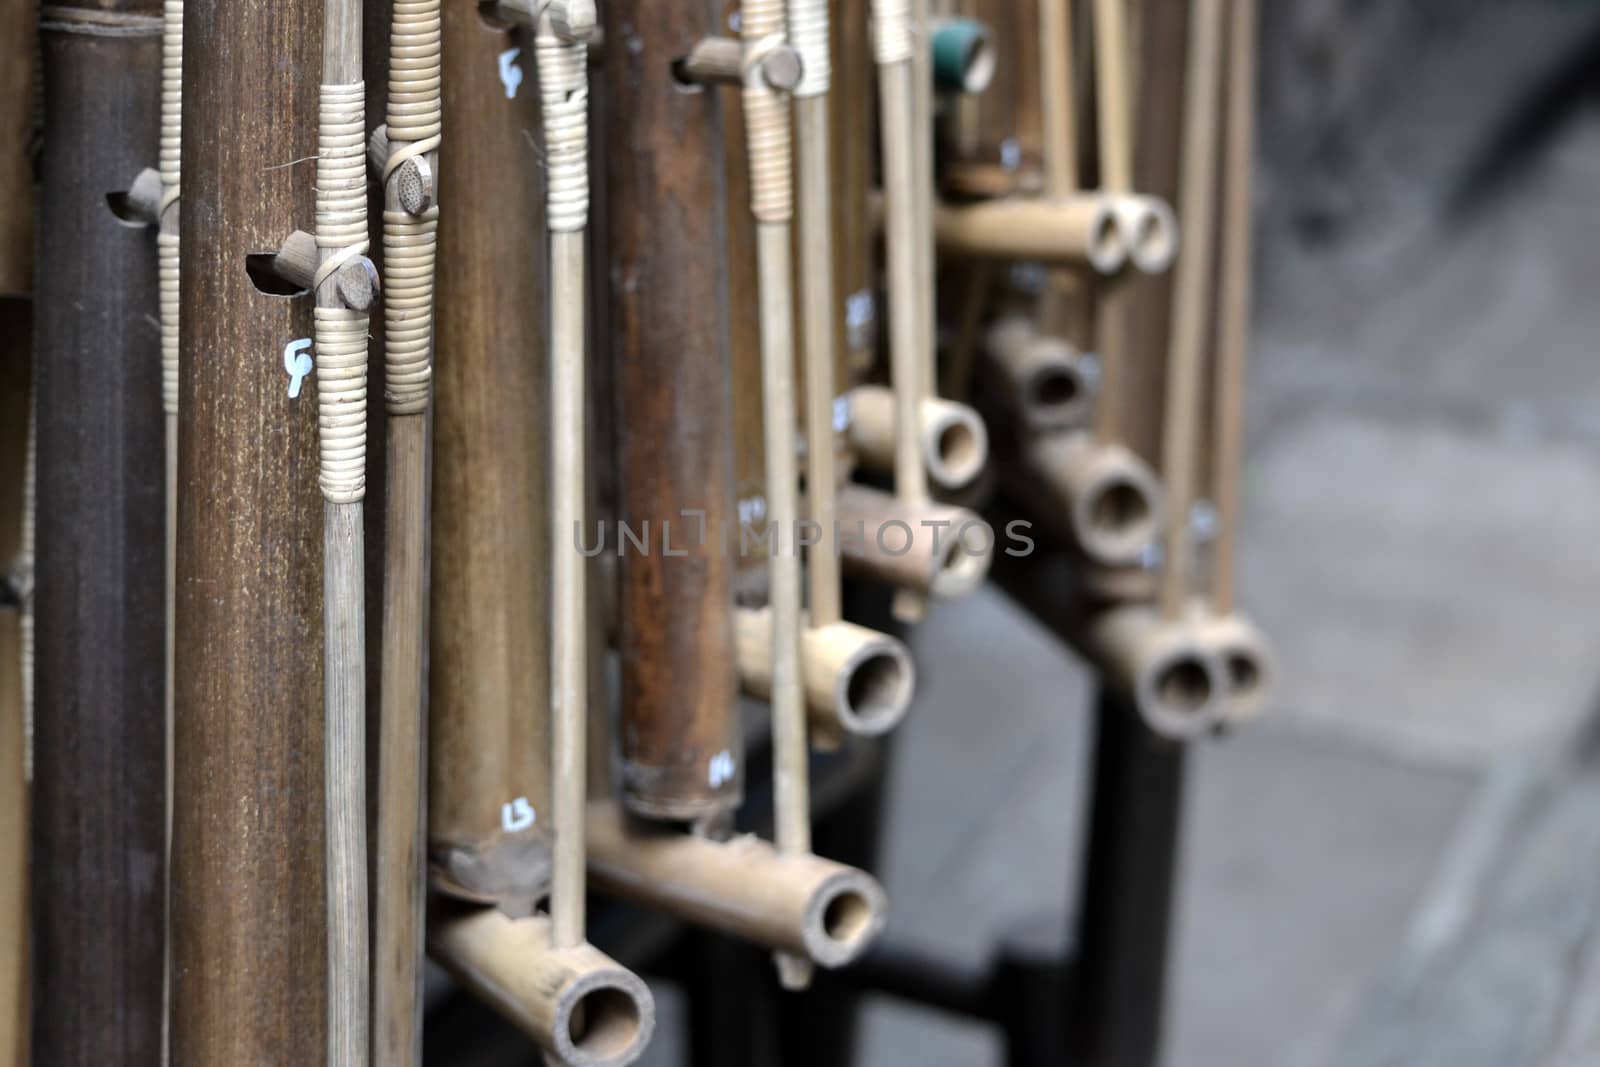 angklung is traditional musical heritage made from bamboo and worldwide recognize originally from indonesia